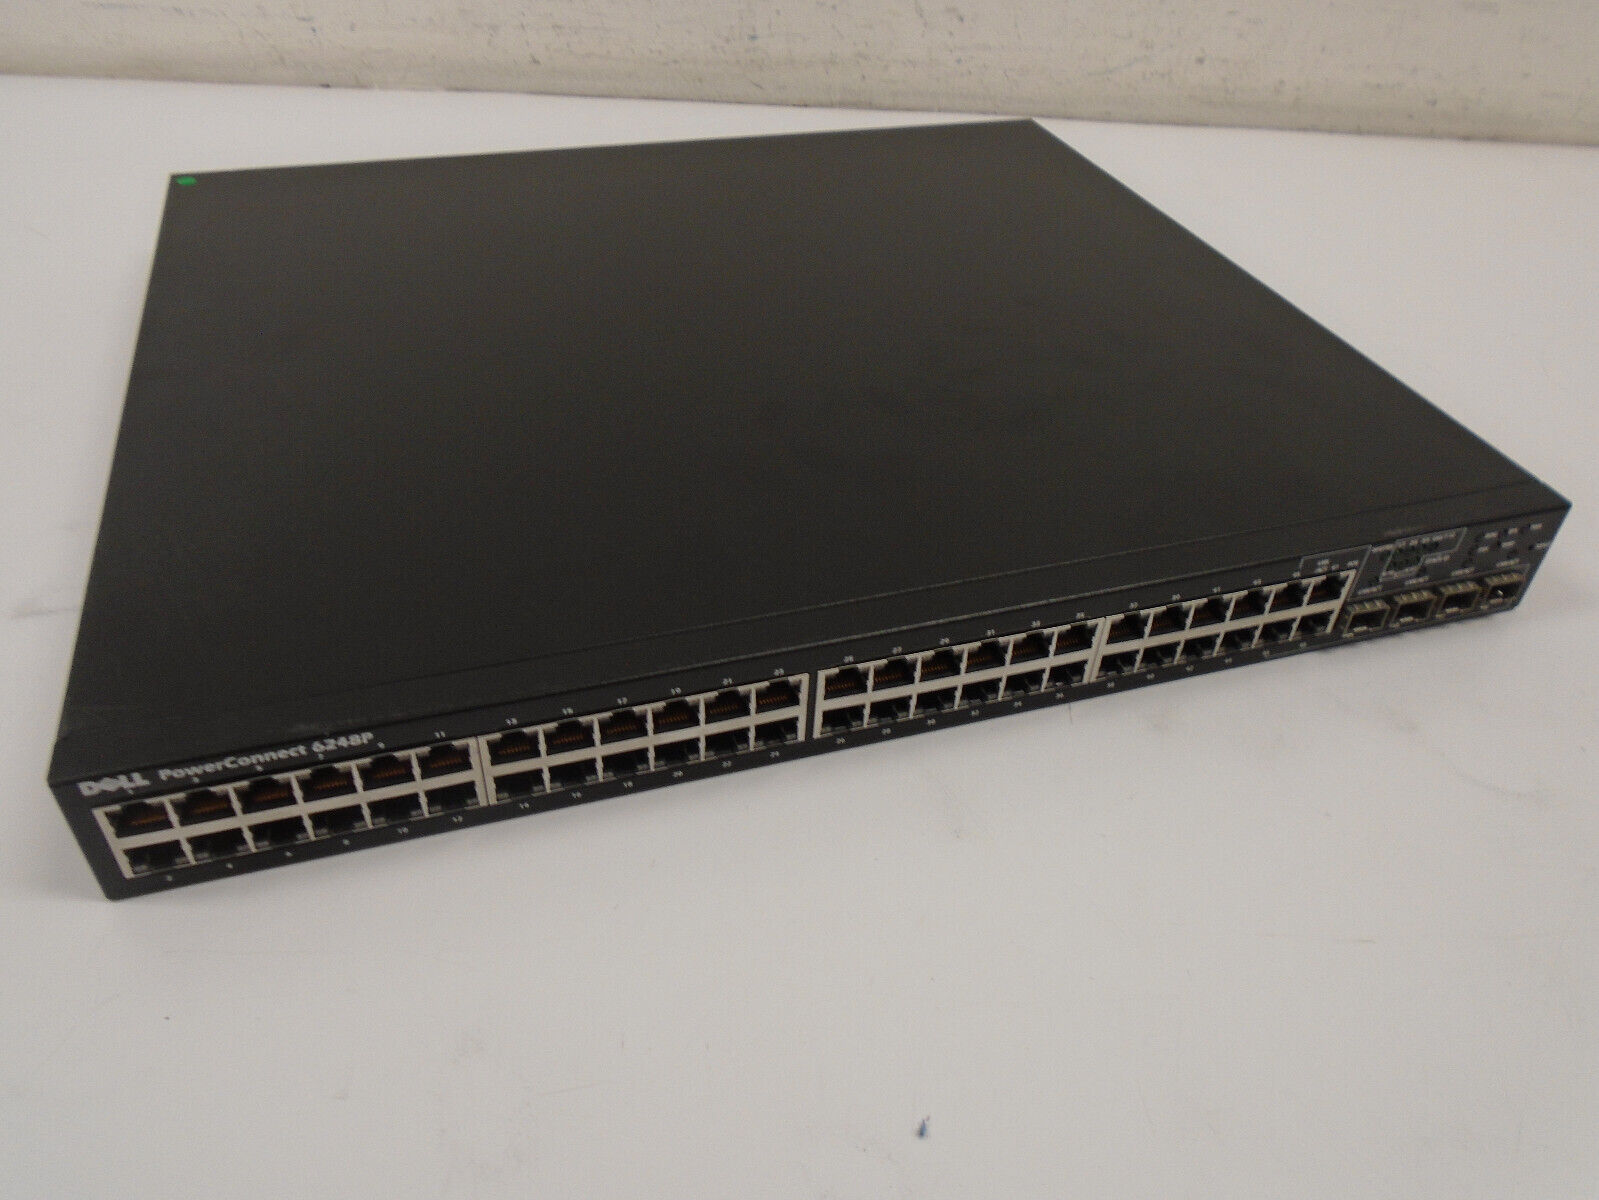 Dell PowerConnect 6248P 48-Port 10/100/1000 Gigabit Managed Ethernet Switch